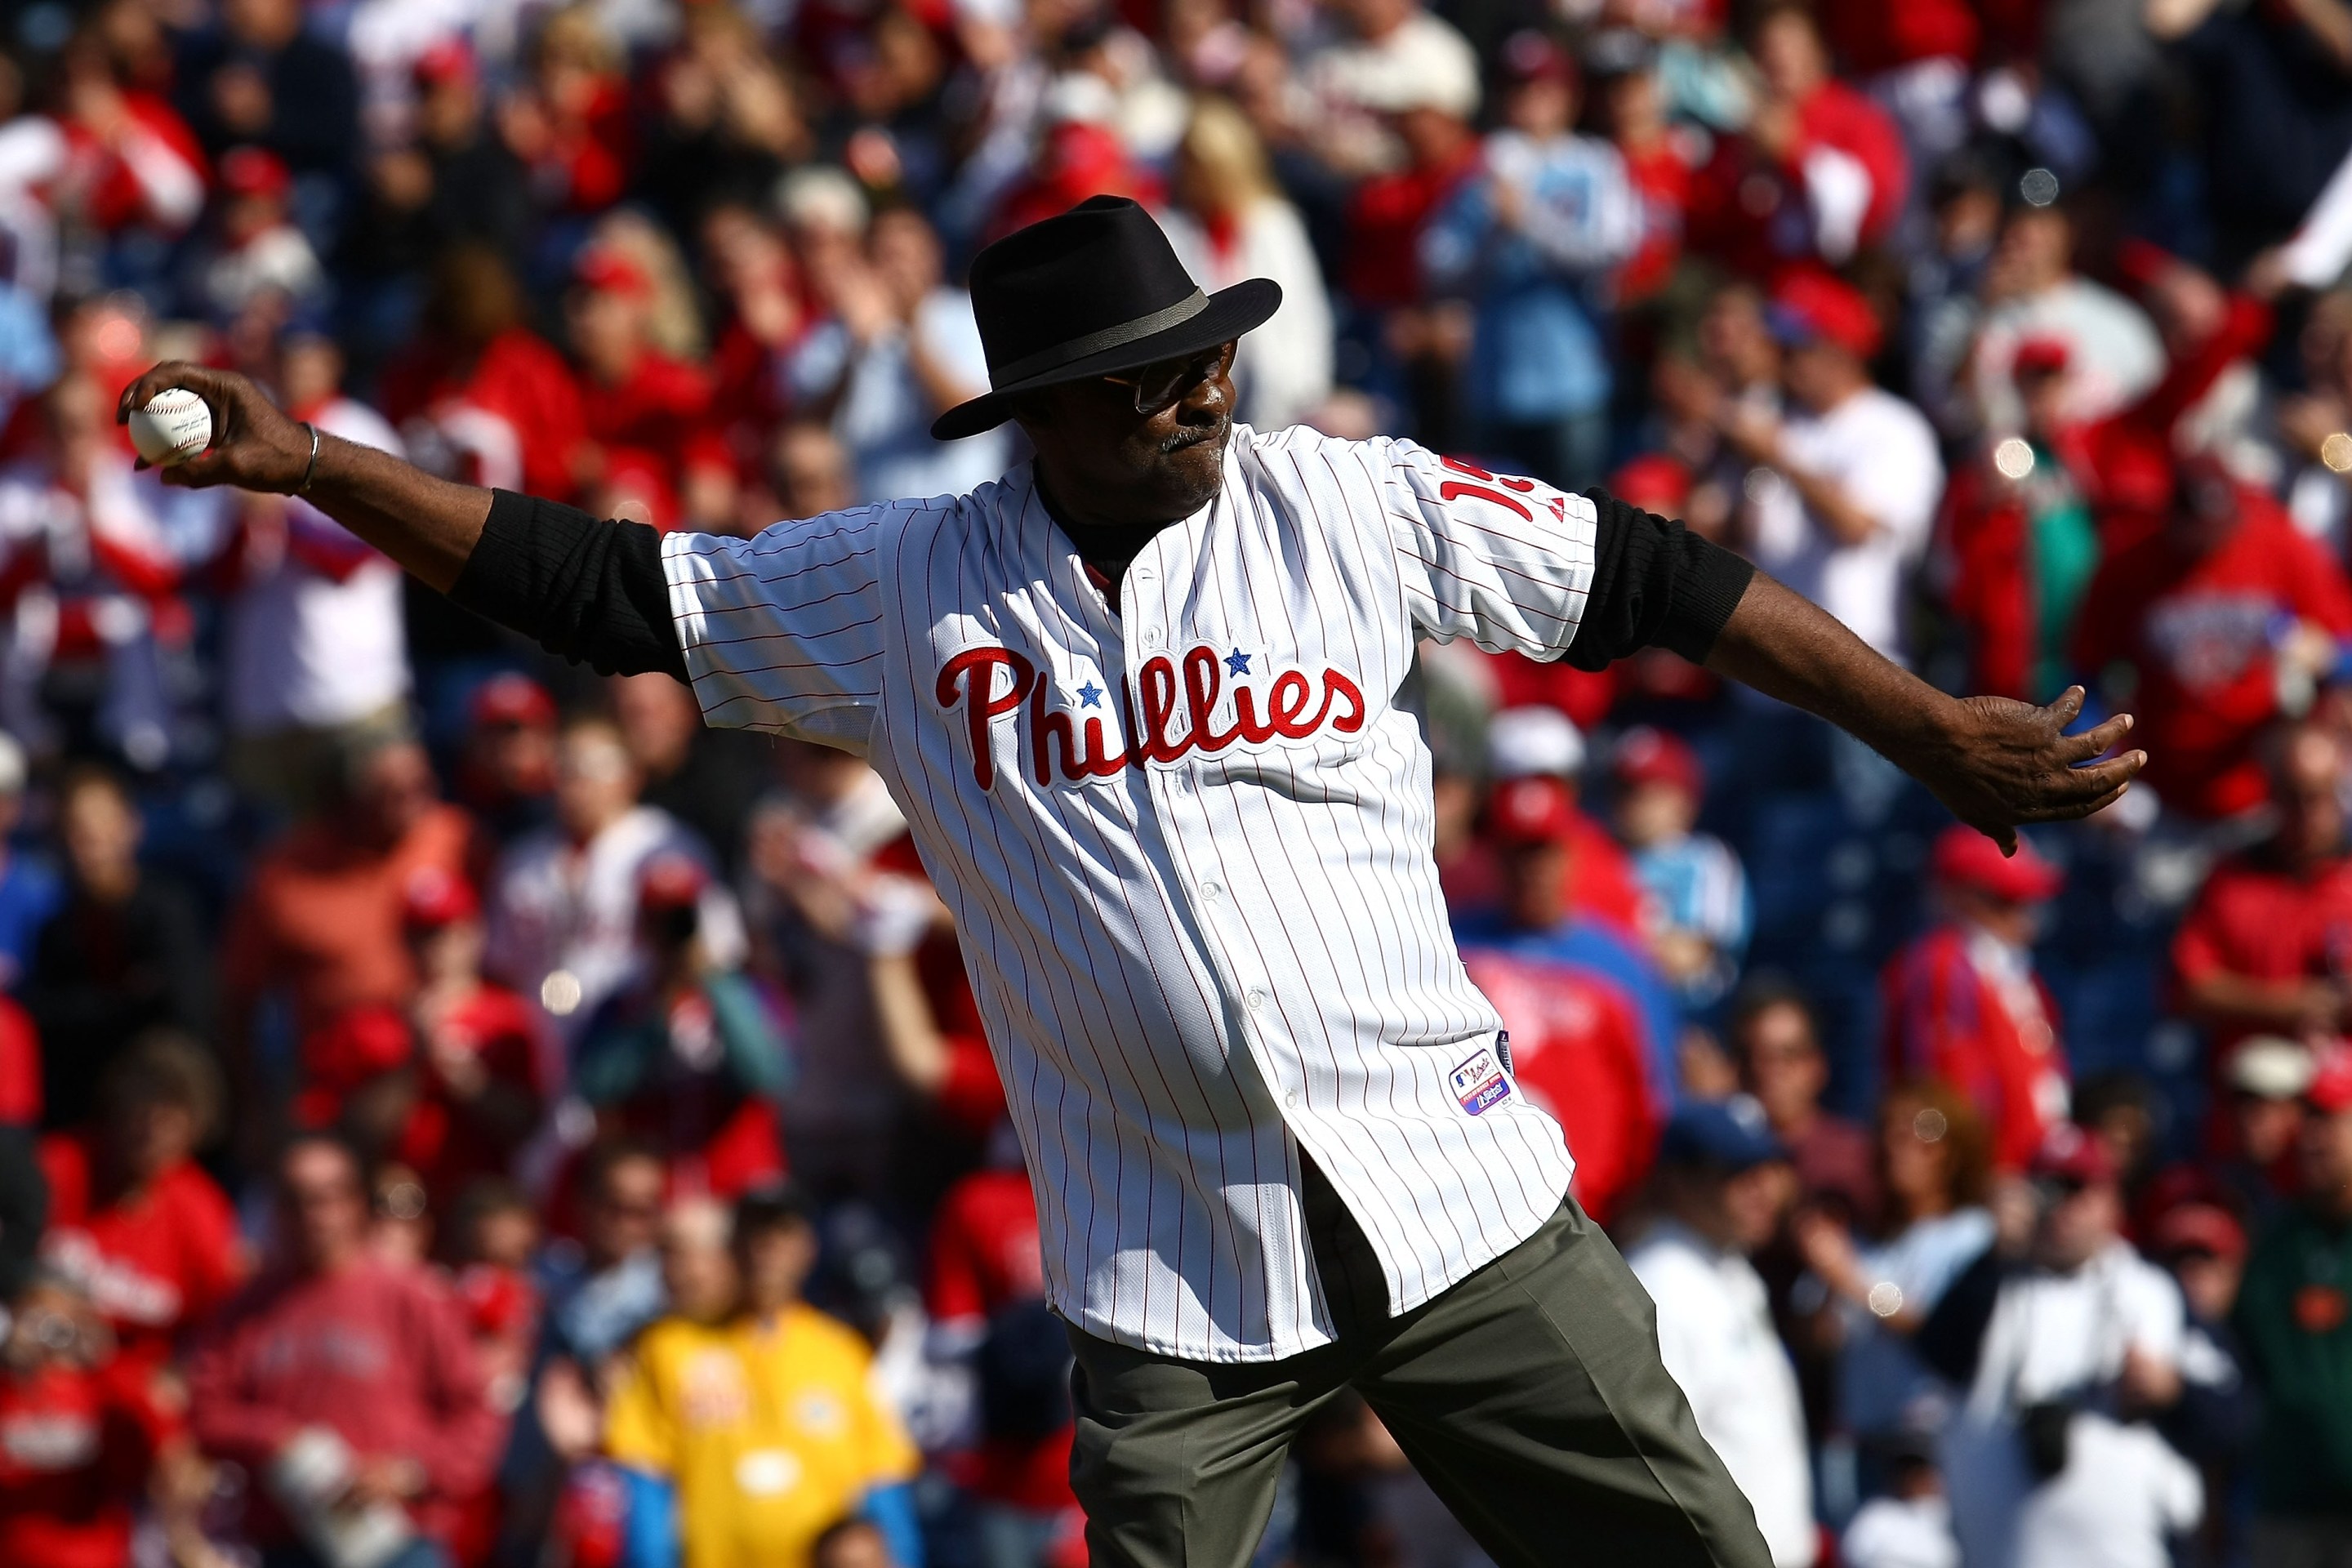 Dick Allen, stylish to the last, throws out the first pitch at a Phillies game in 2009.